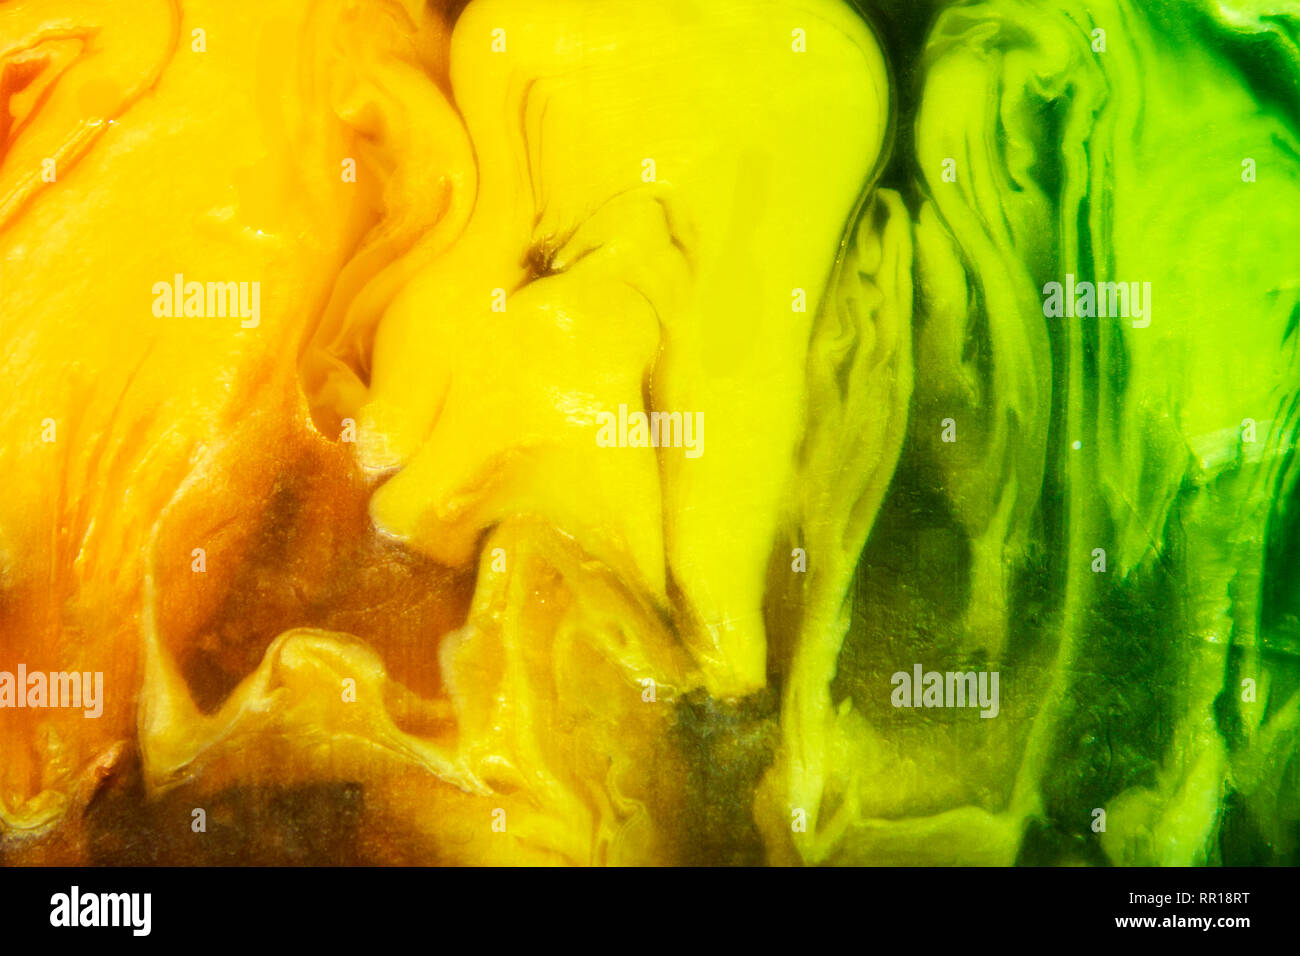 Сolorful piece of handmade semitransparent soap closeup, scenic yellow and green frozen forms Stock Photo